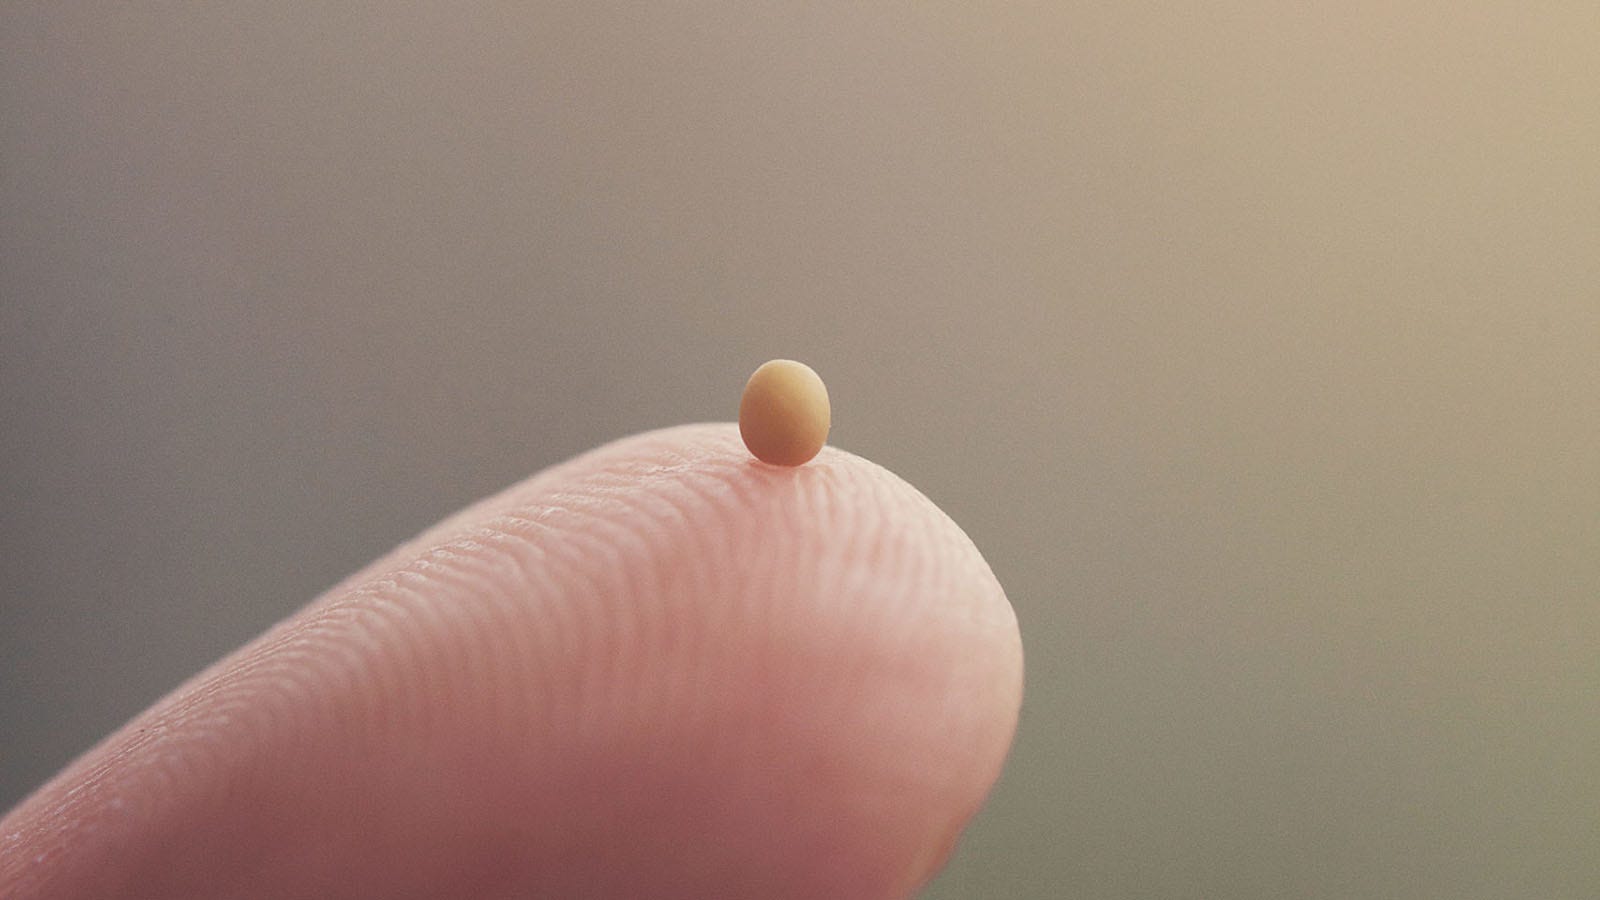 Small egg looking object on the tip of a finger